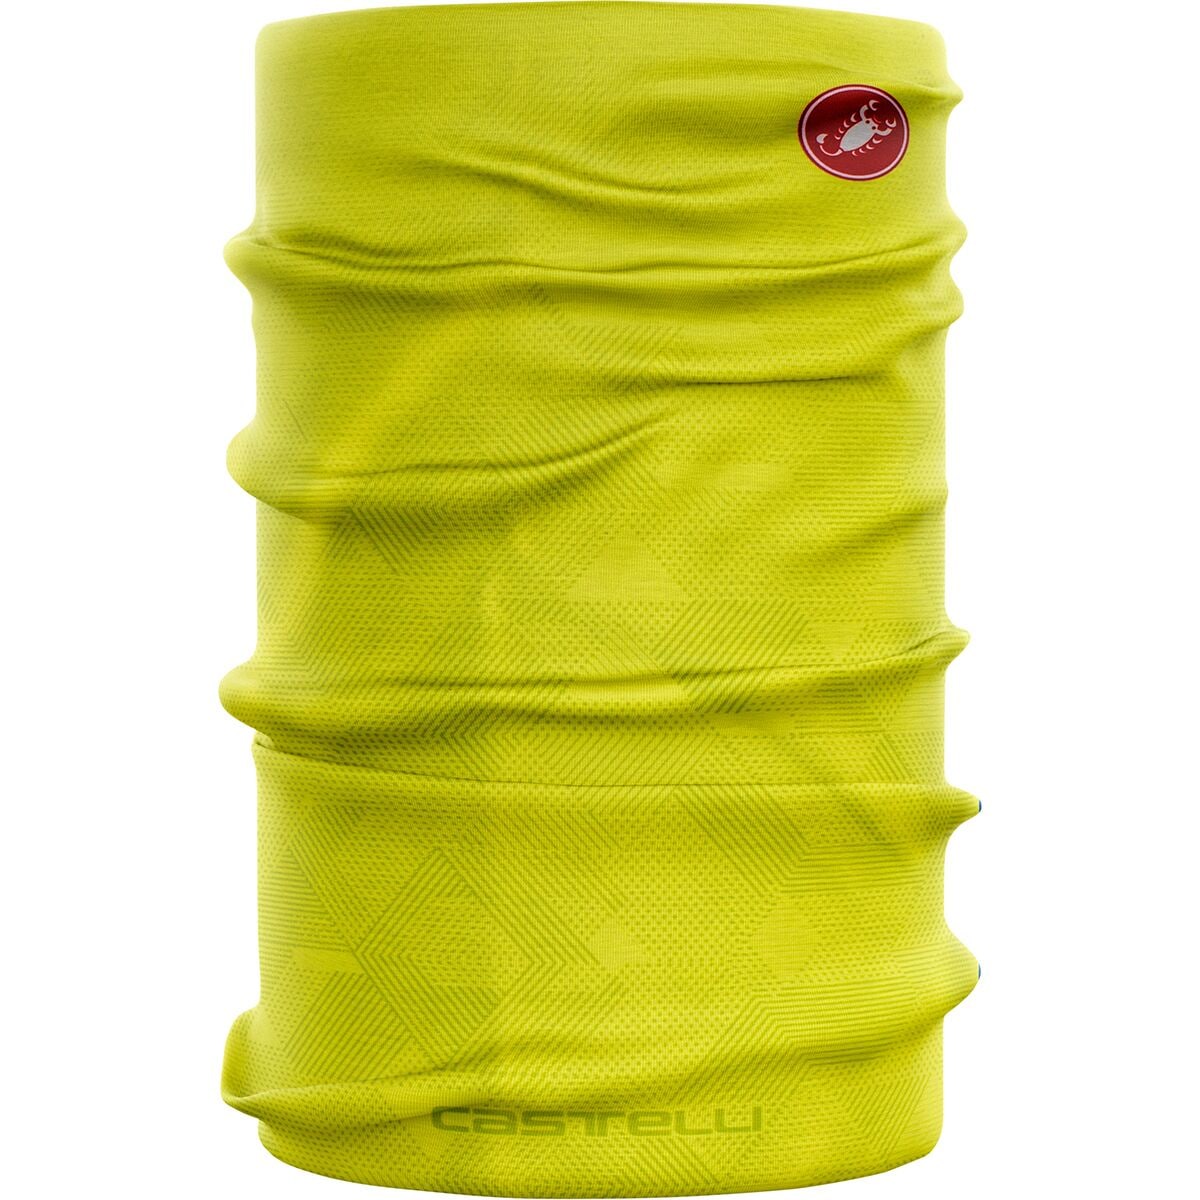 Castelli Pro Thermal Headthingy - Women's Brilliant Yellow, One Size